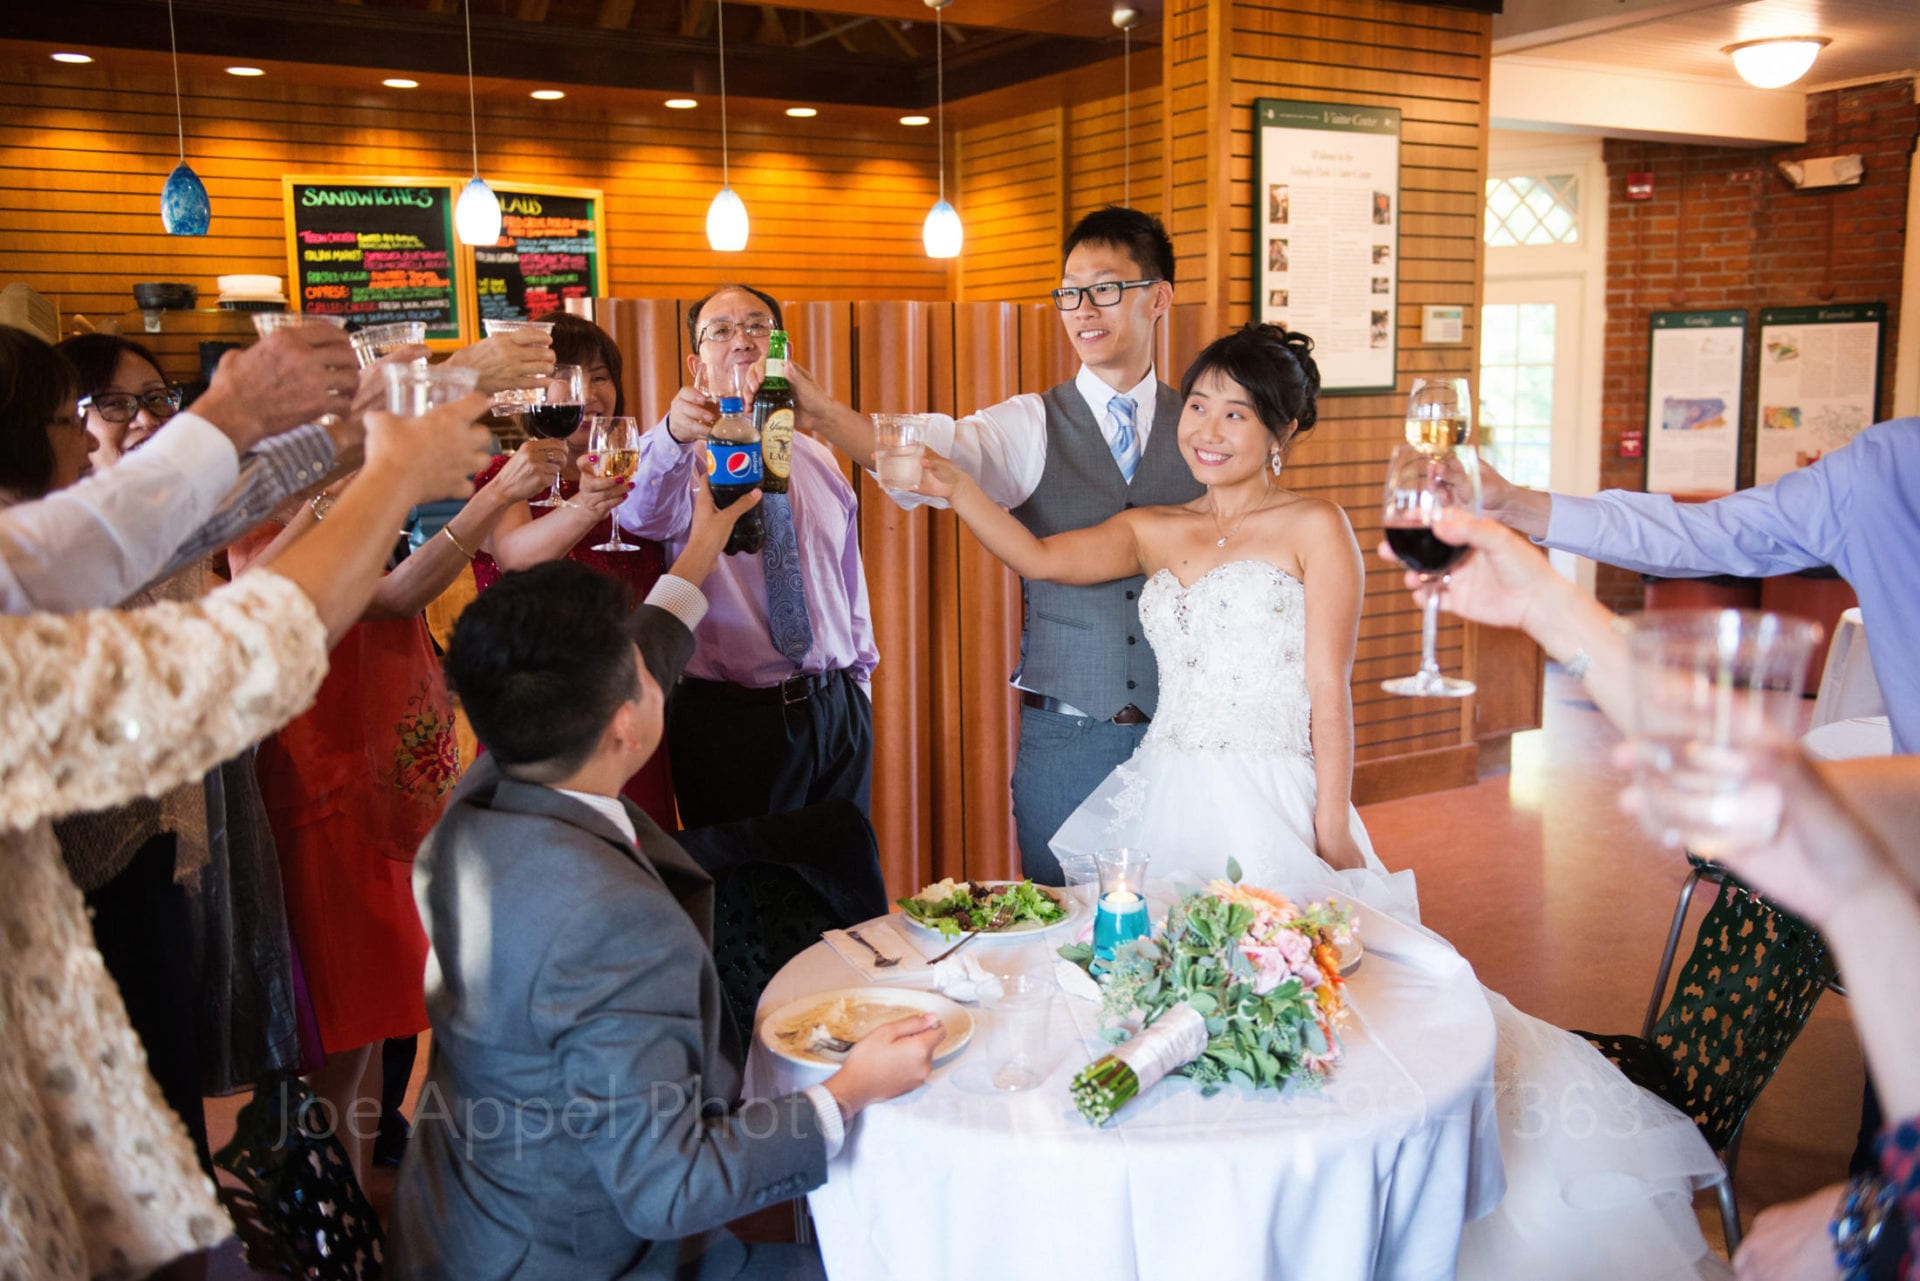 a bride and groom toast with their wedding guests at the Schenley Park cafe and visitors center